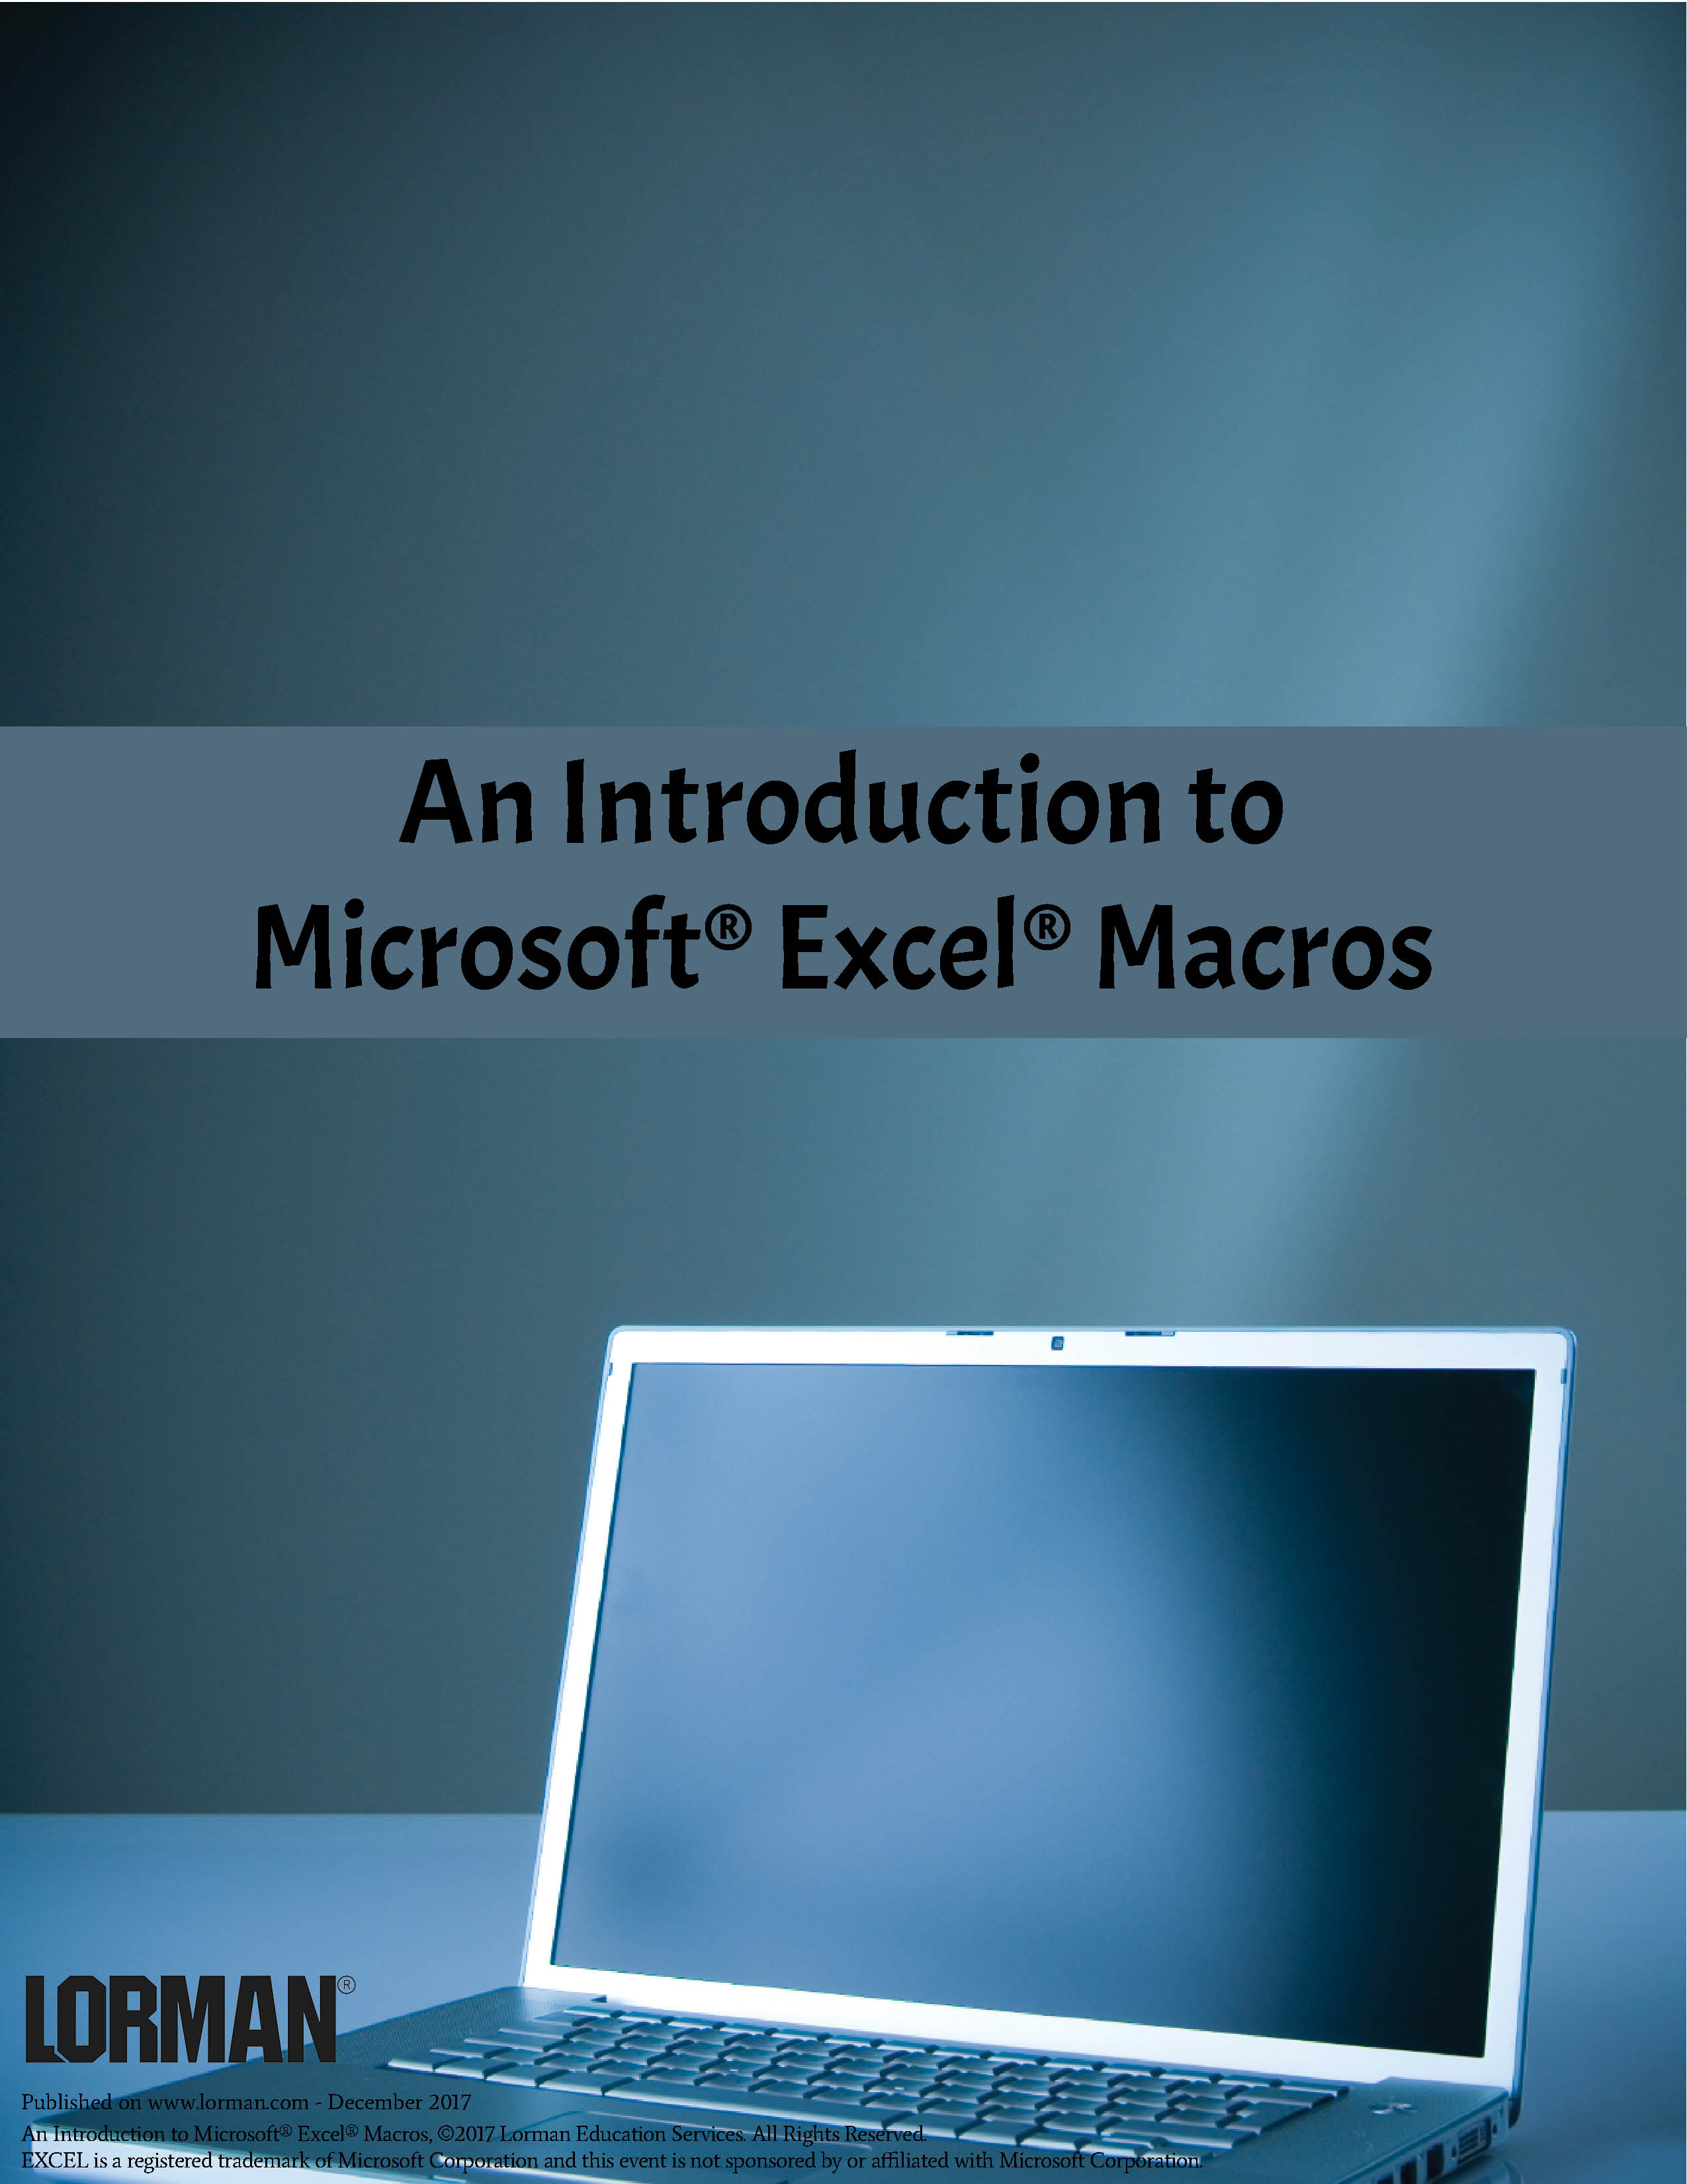 An Introduction to Microsoft® Excel® Macros